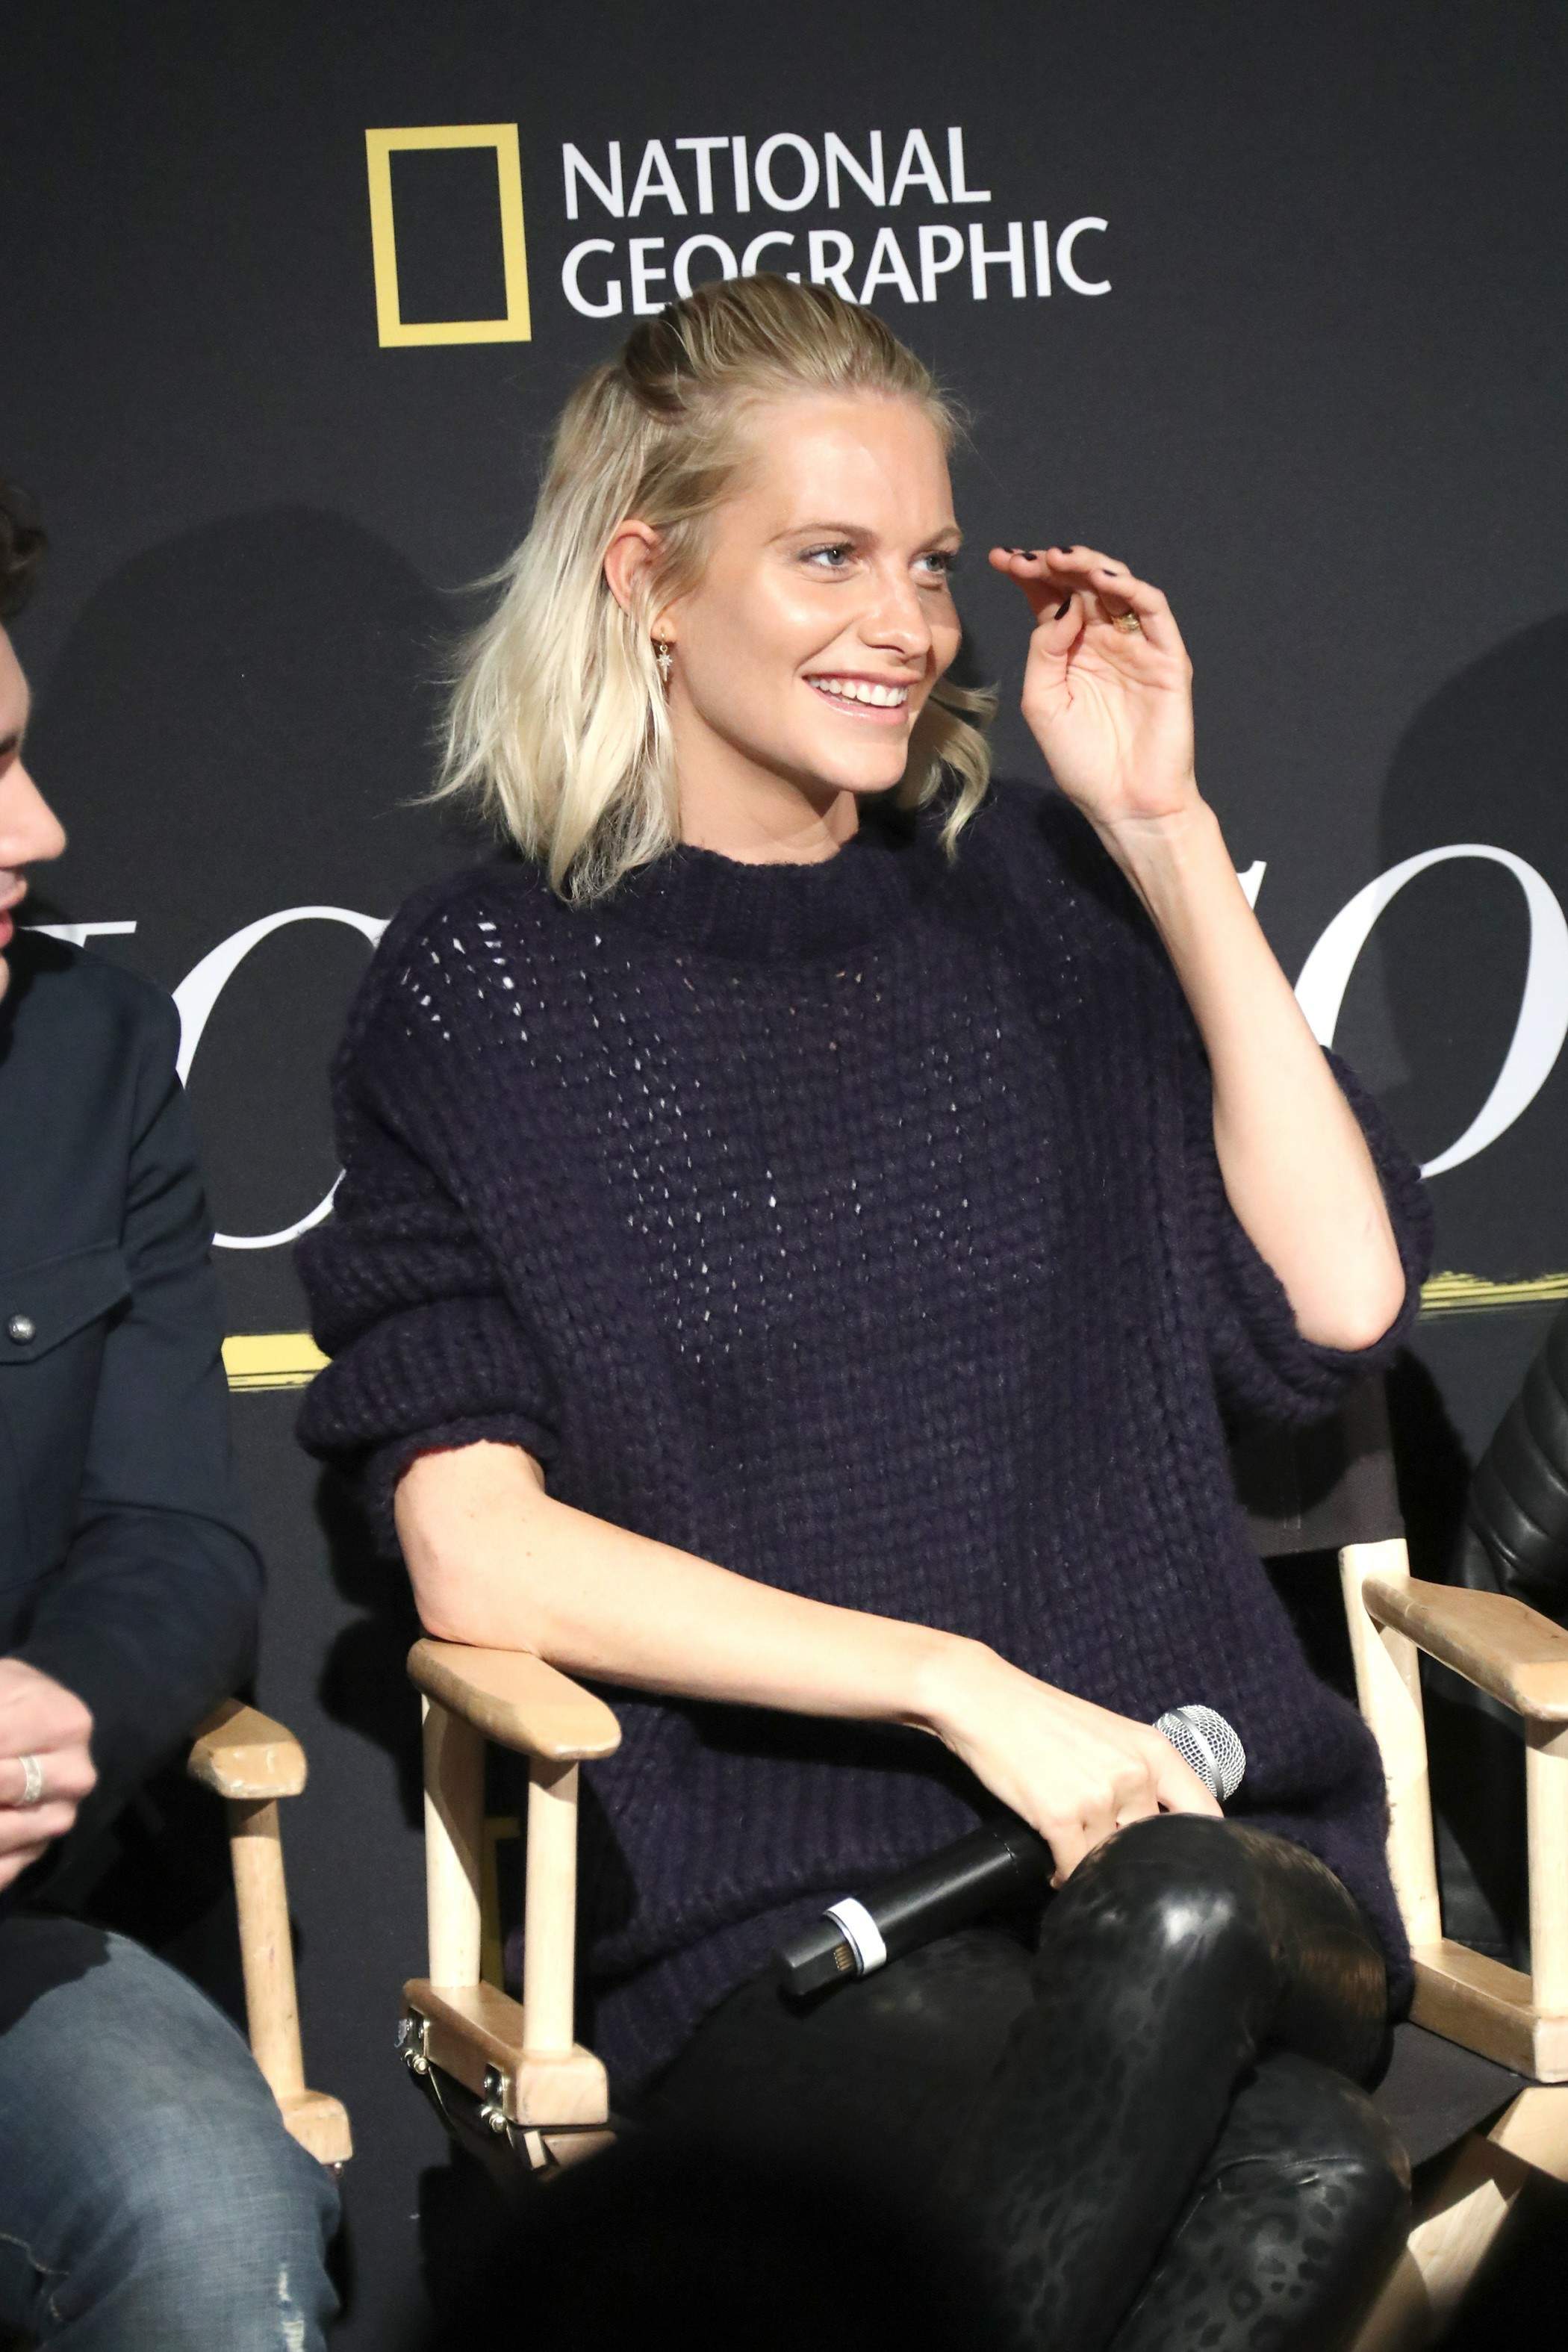 Poppy Delevingne attends Genius Picasso TV series photocall